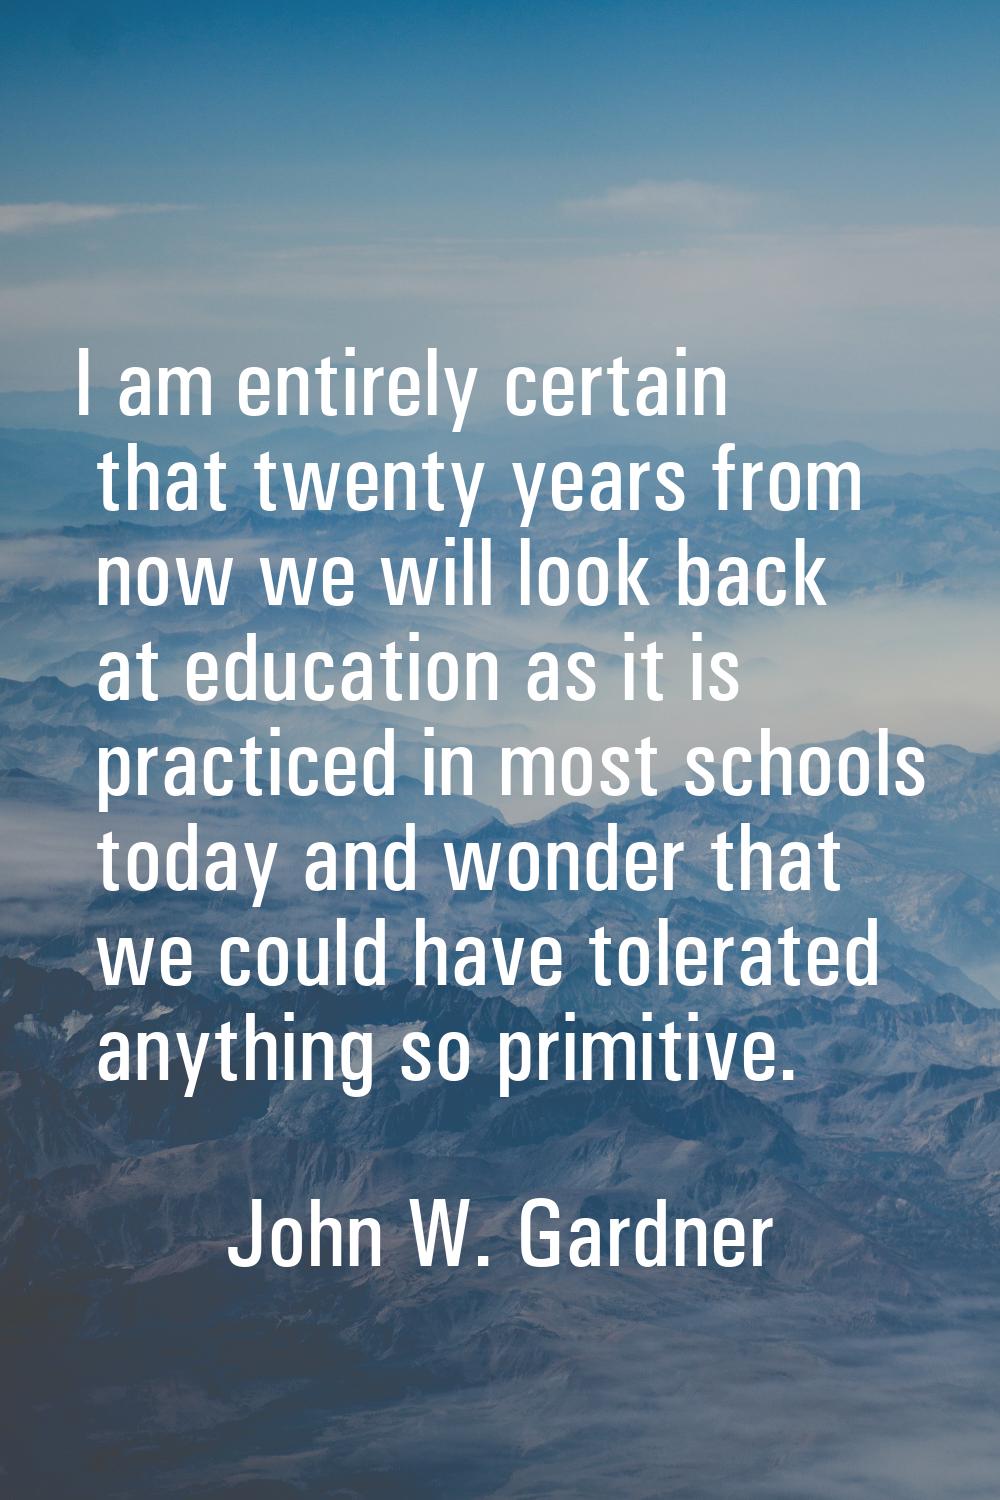 I am entirely certain that twenty years from now we will look back at education as it is practiced 